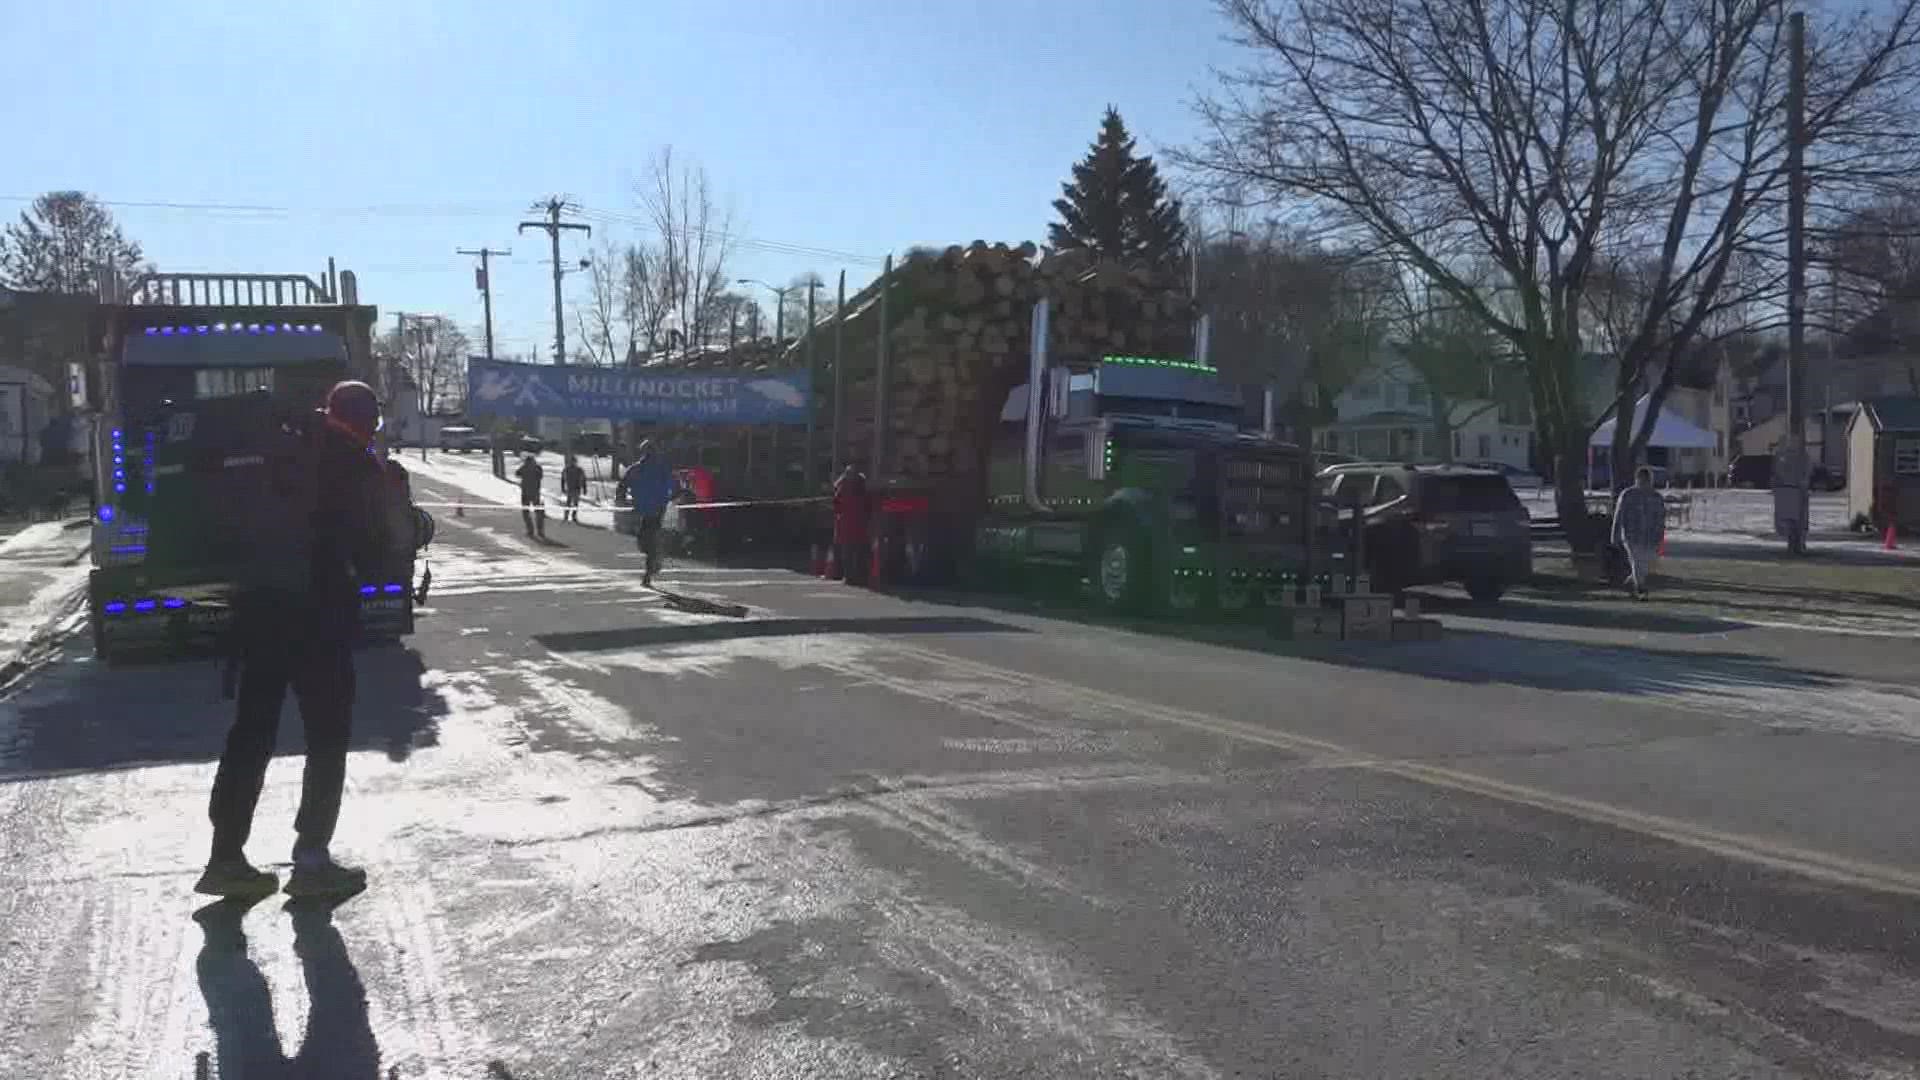 There was no entry fee for the race, instead, runners were asked to spend money in Millinocket to support the town.